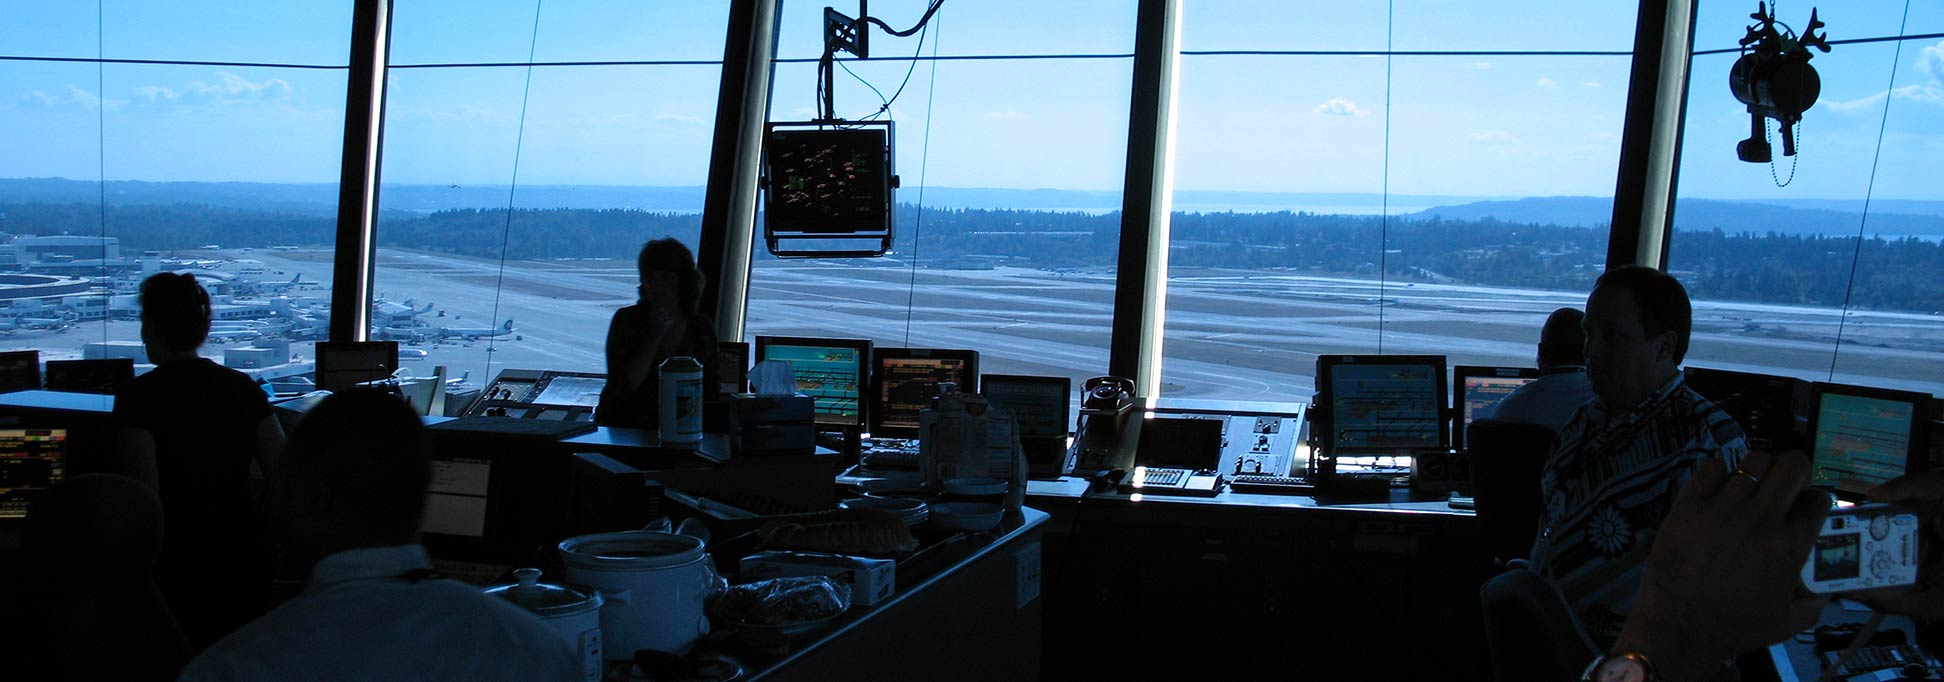 Interior of the control tower of Seattle-Tacoma (SeaTac) International Airport